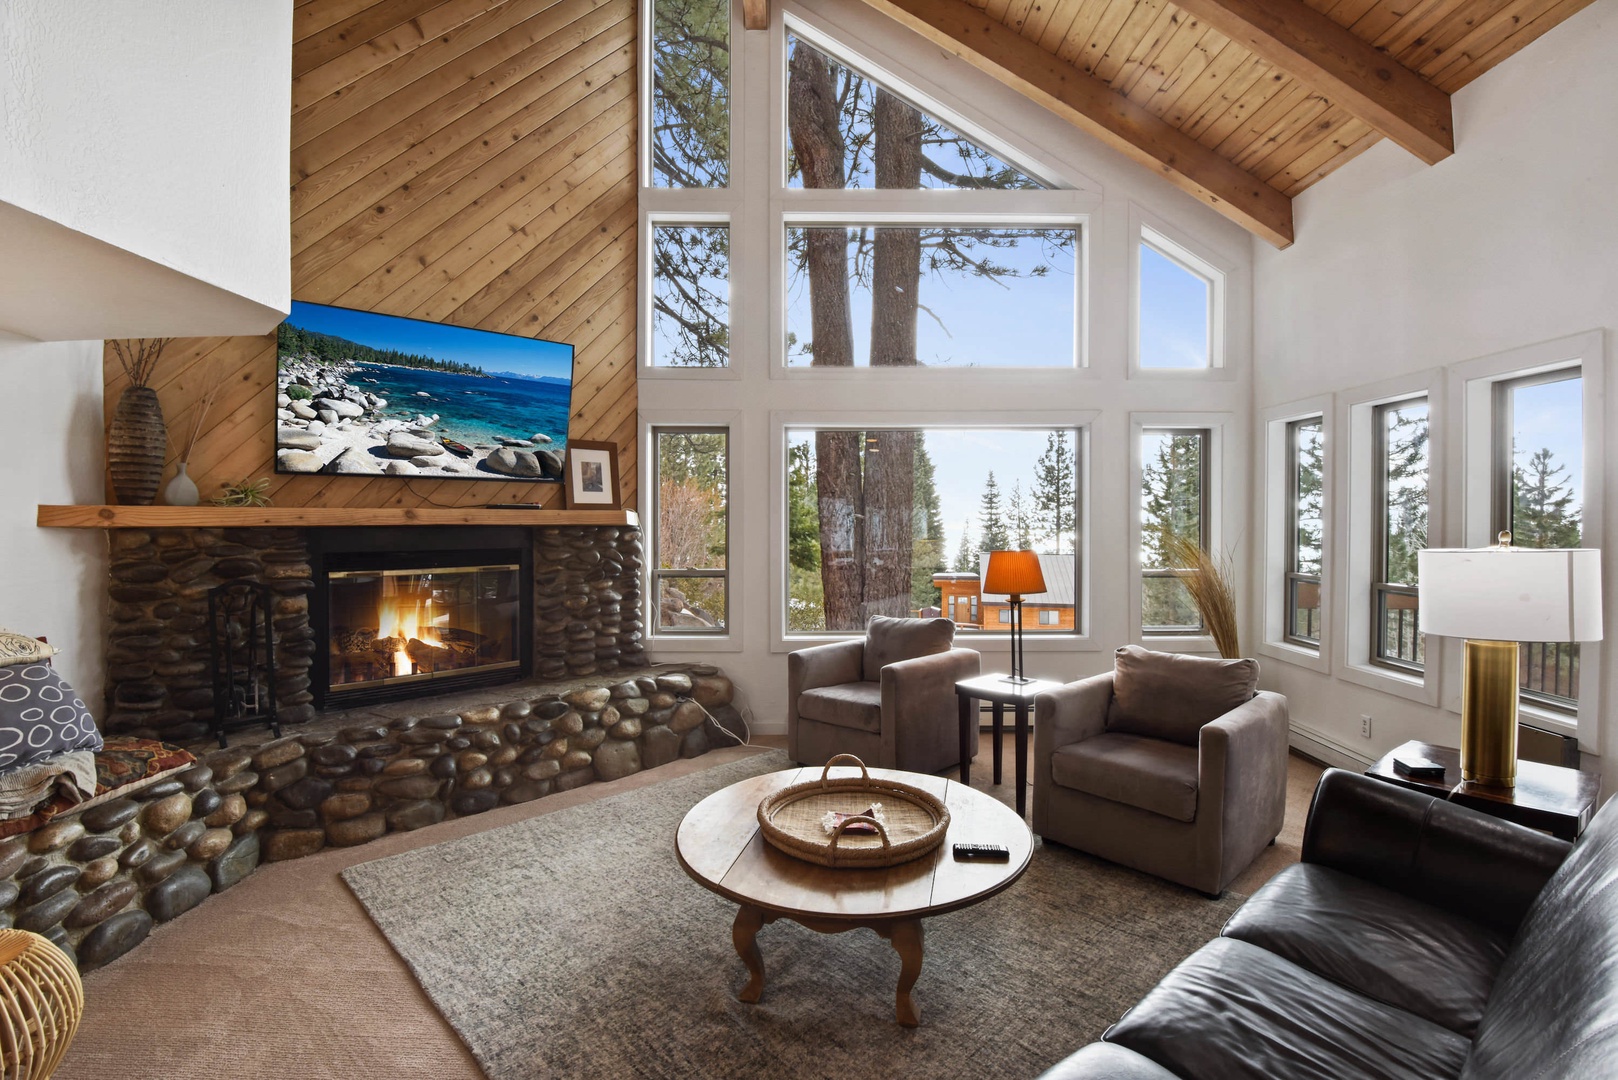 Living room w/ Smart TV, DVD player, wood burning fireplace and deck access